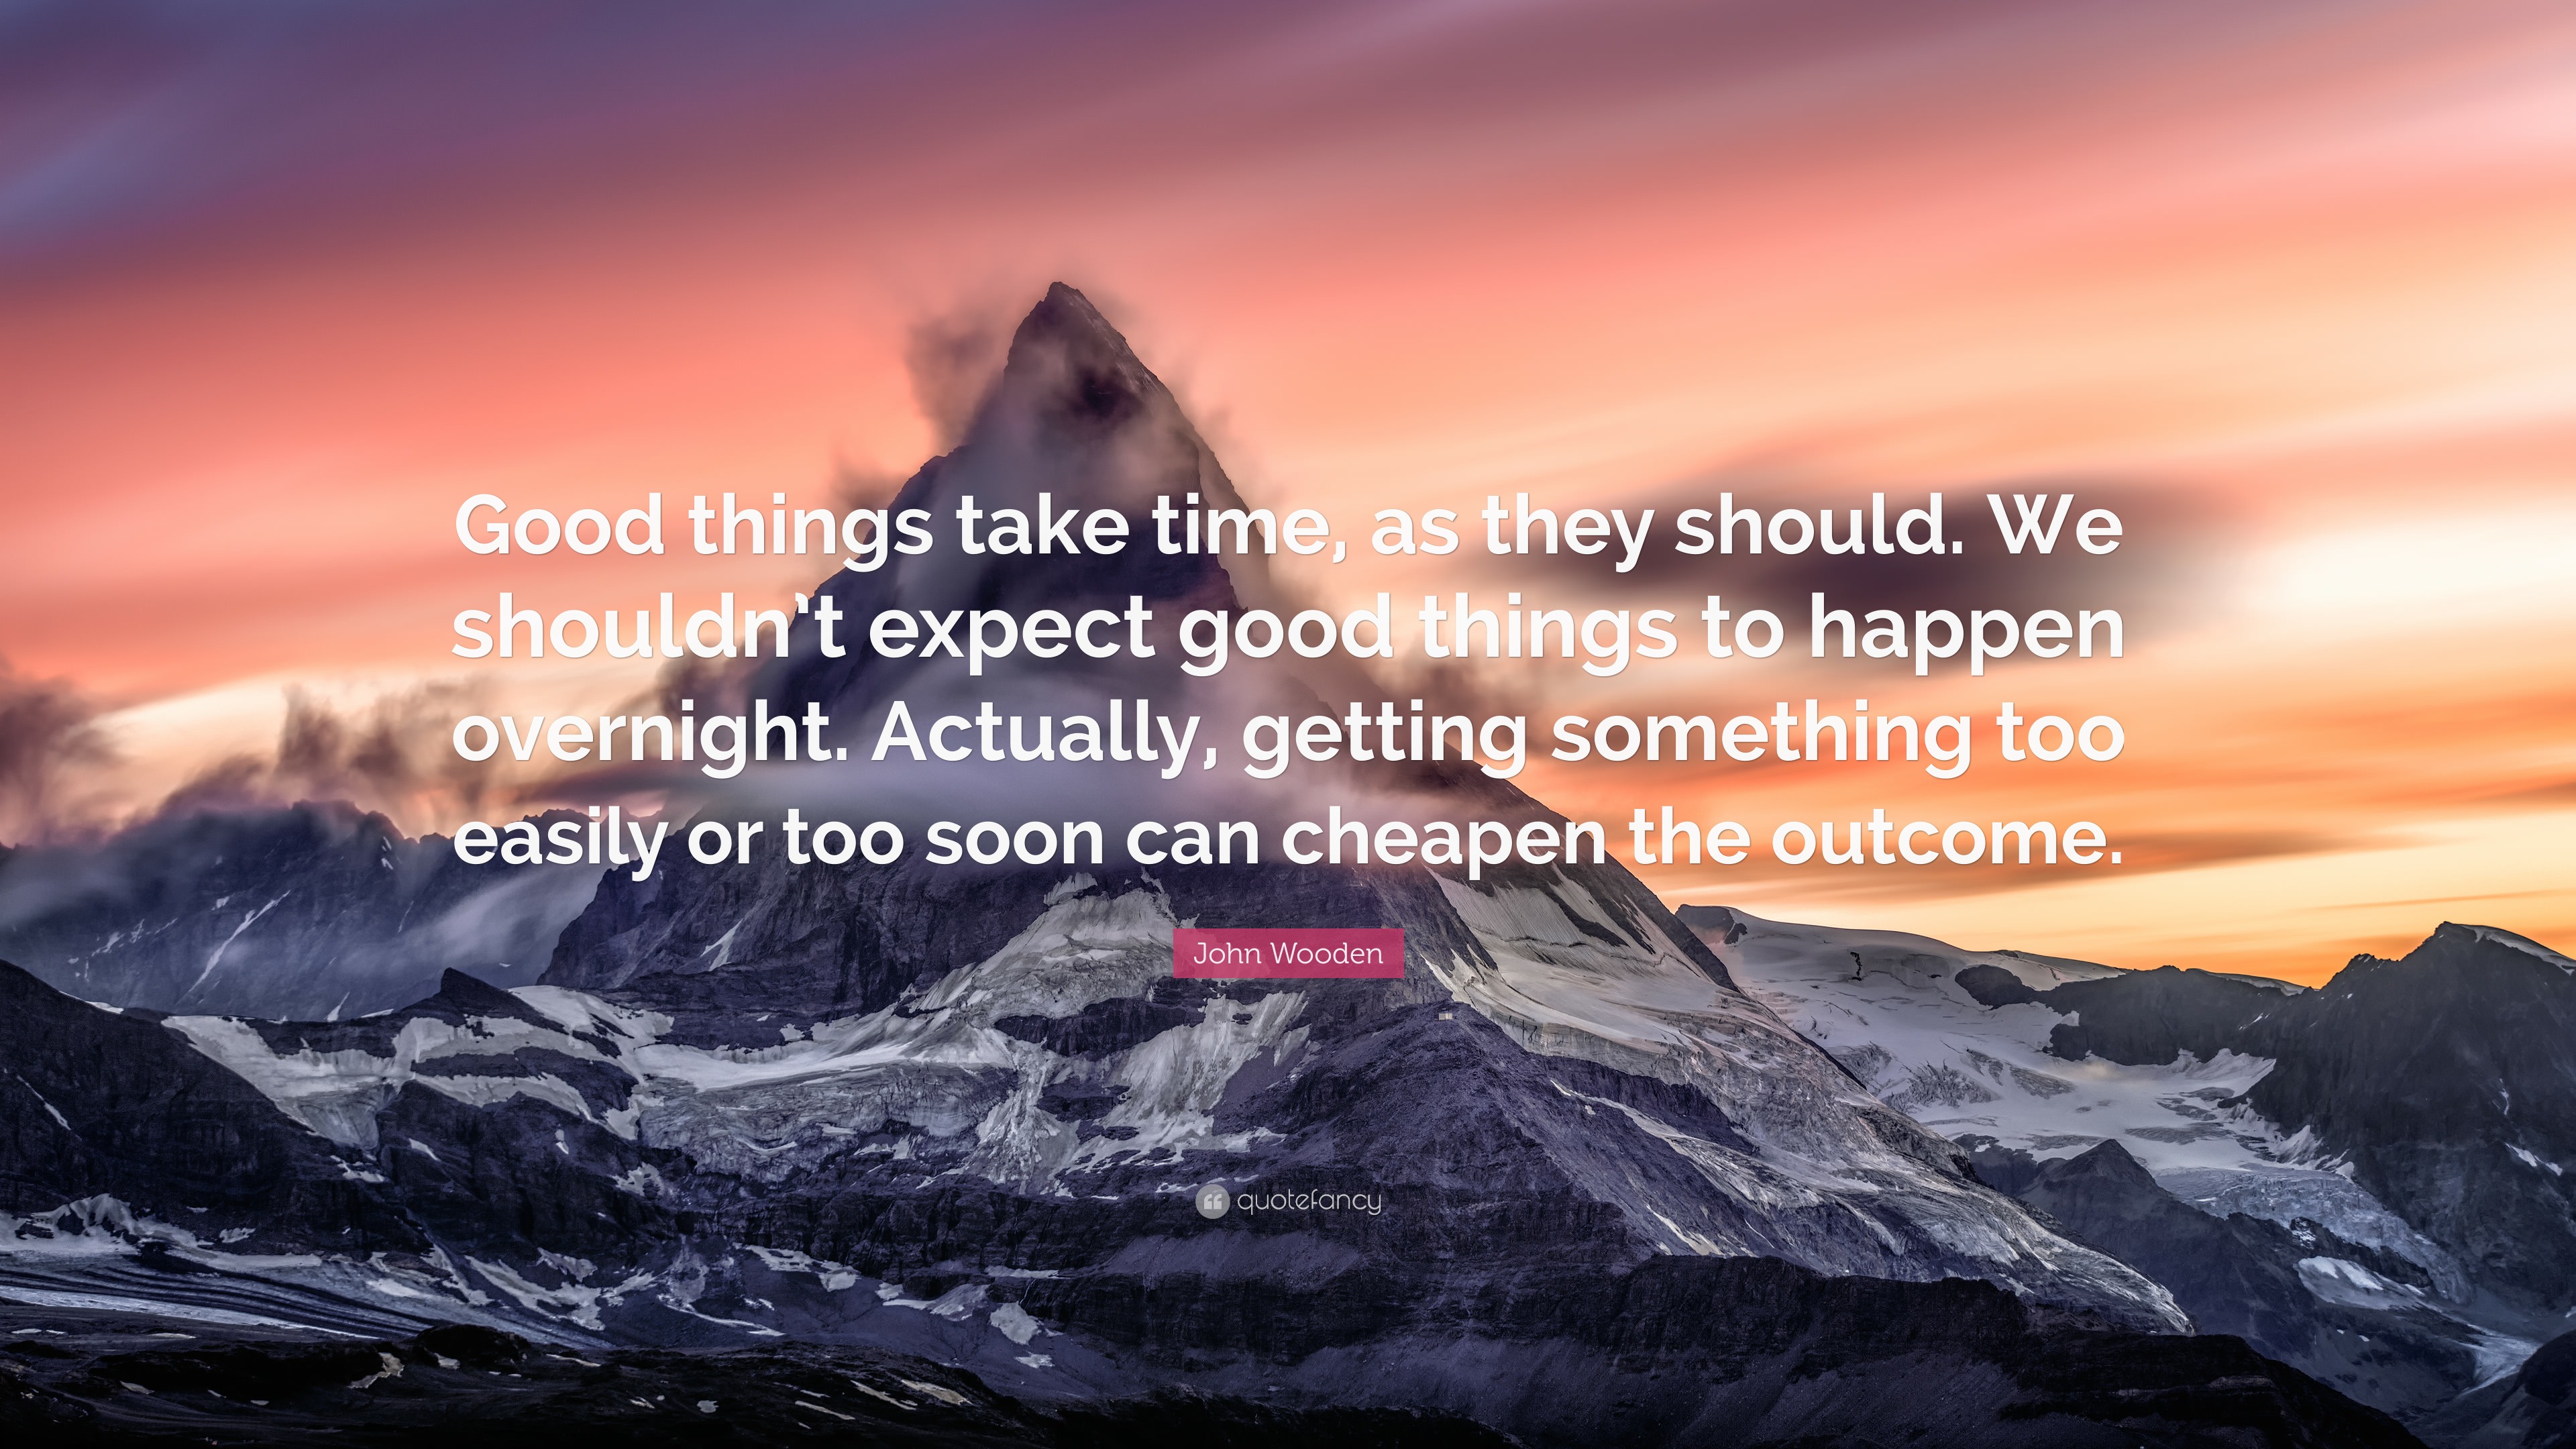 John Wooden Quote: “Good things take time, as they should. We shouldn't  expect good things to happen overnight. Actually, getting something ...”